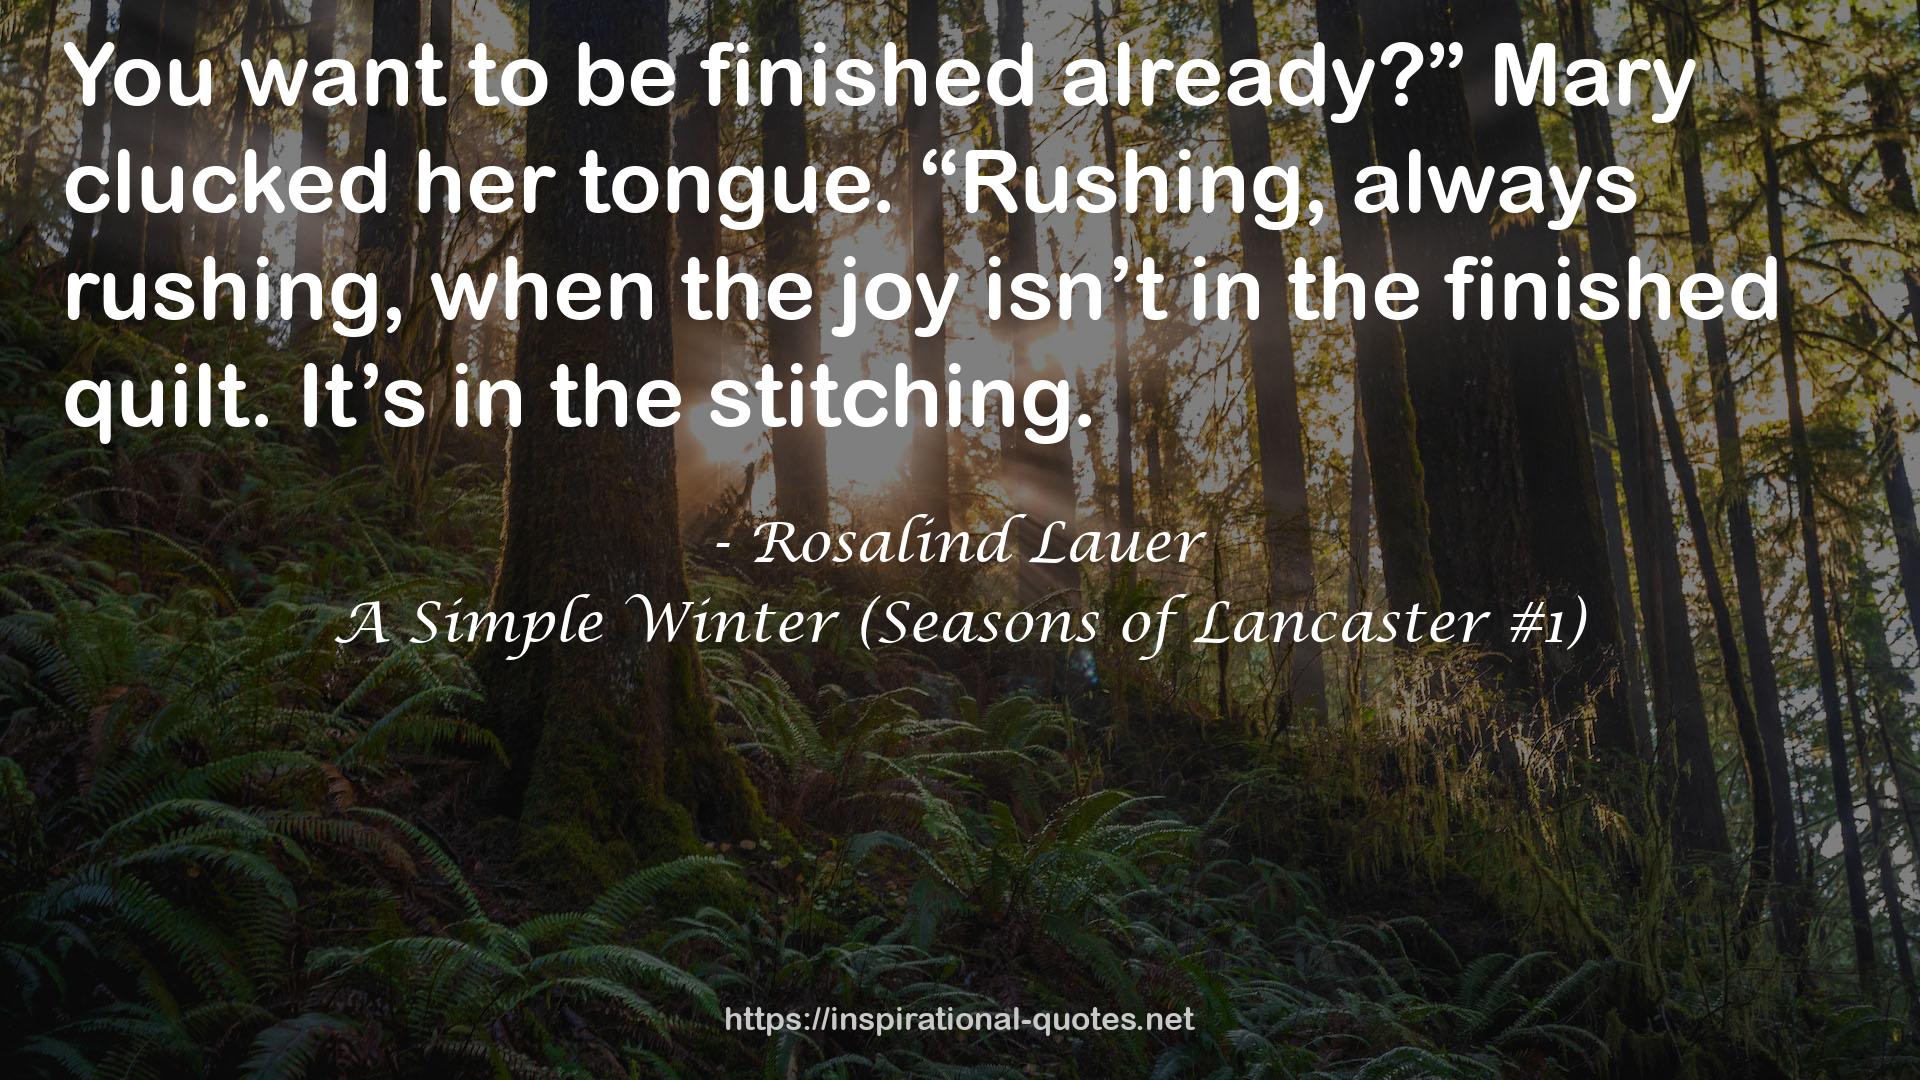 A Simple Winter (Seasons of Lancaster #1) QUOTES